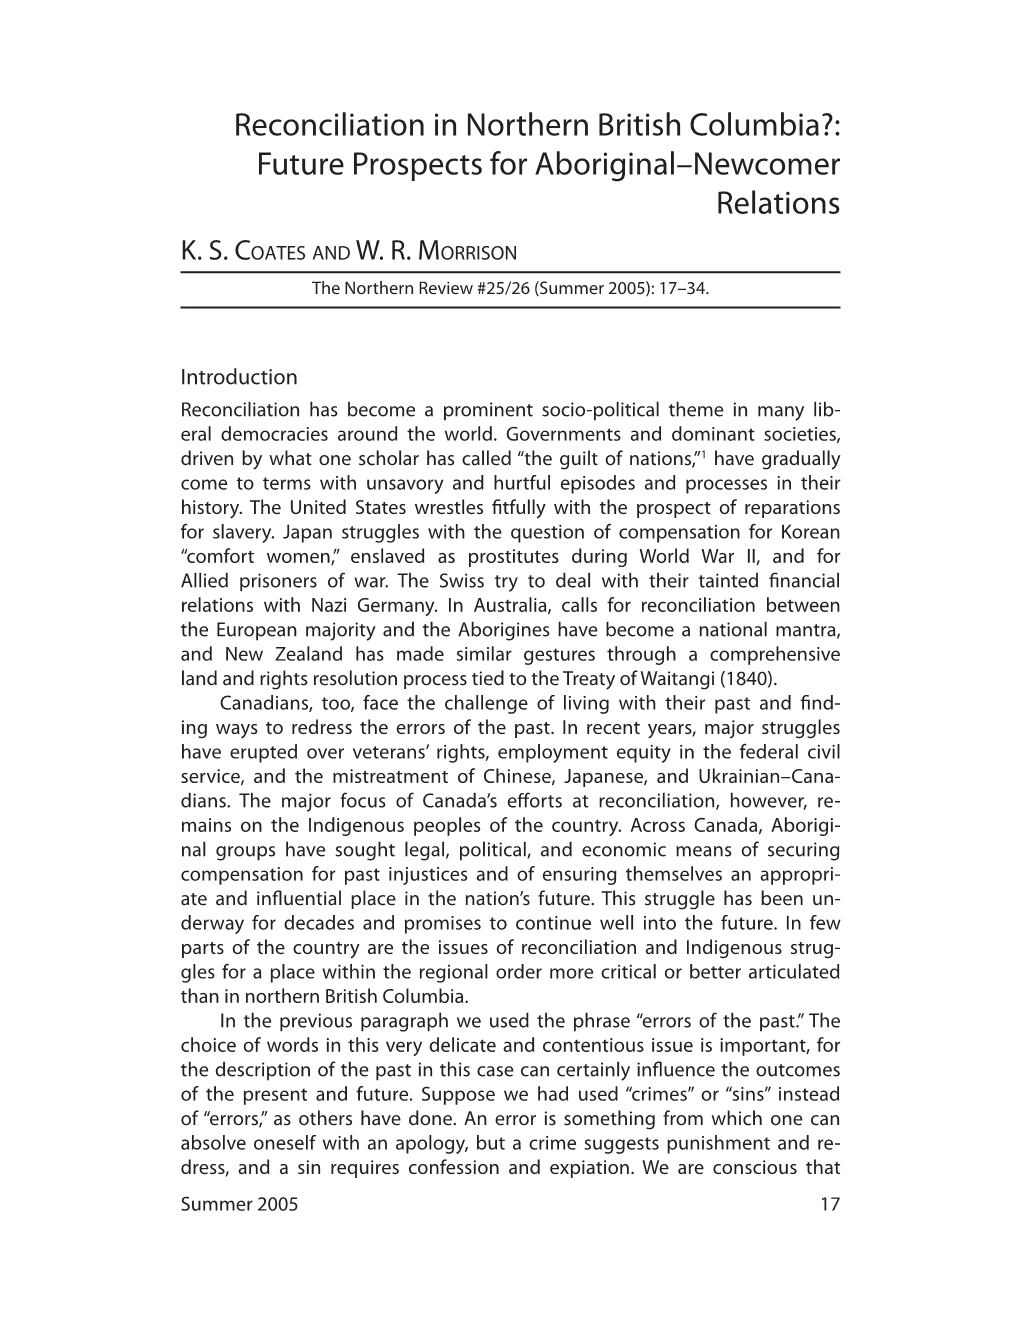 Reconciliation in Northern British Columbia?: Future Prospects for Aboriginal–Newcomer Relations